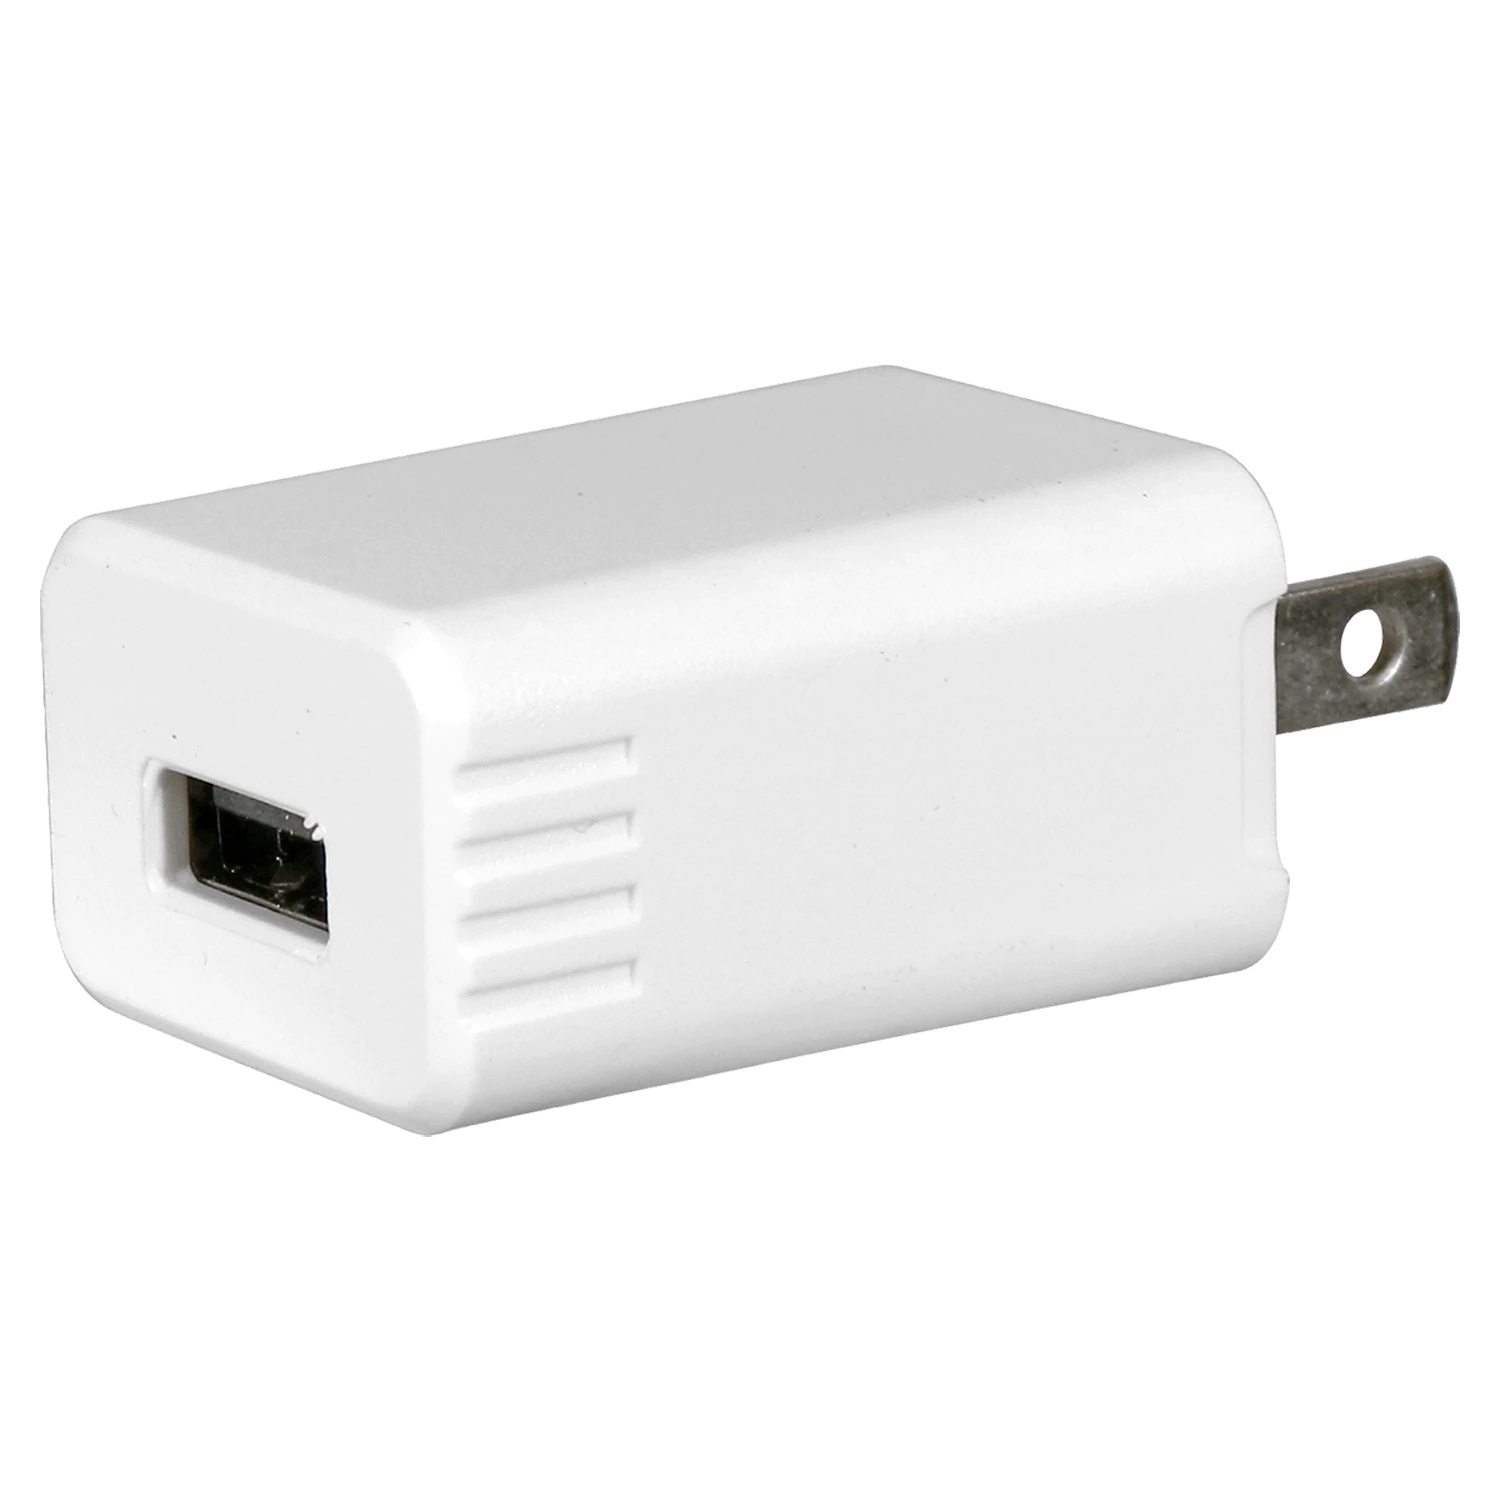 USB Wall Charger - set of 3-pack white